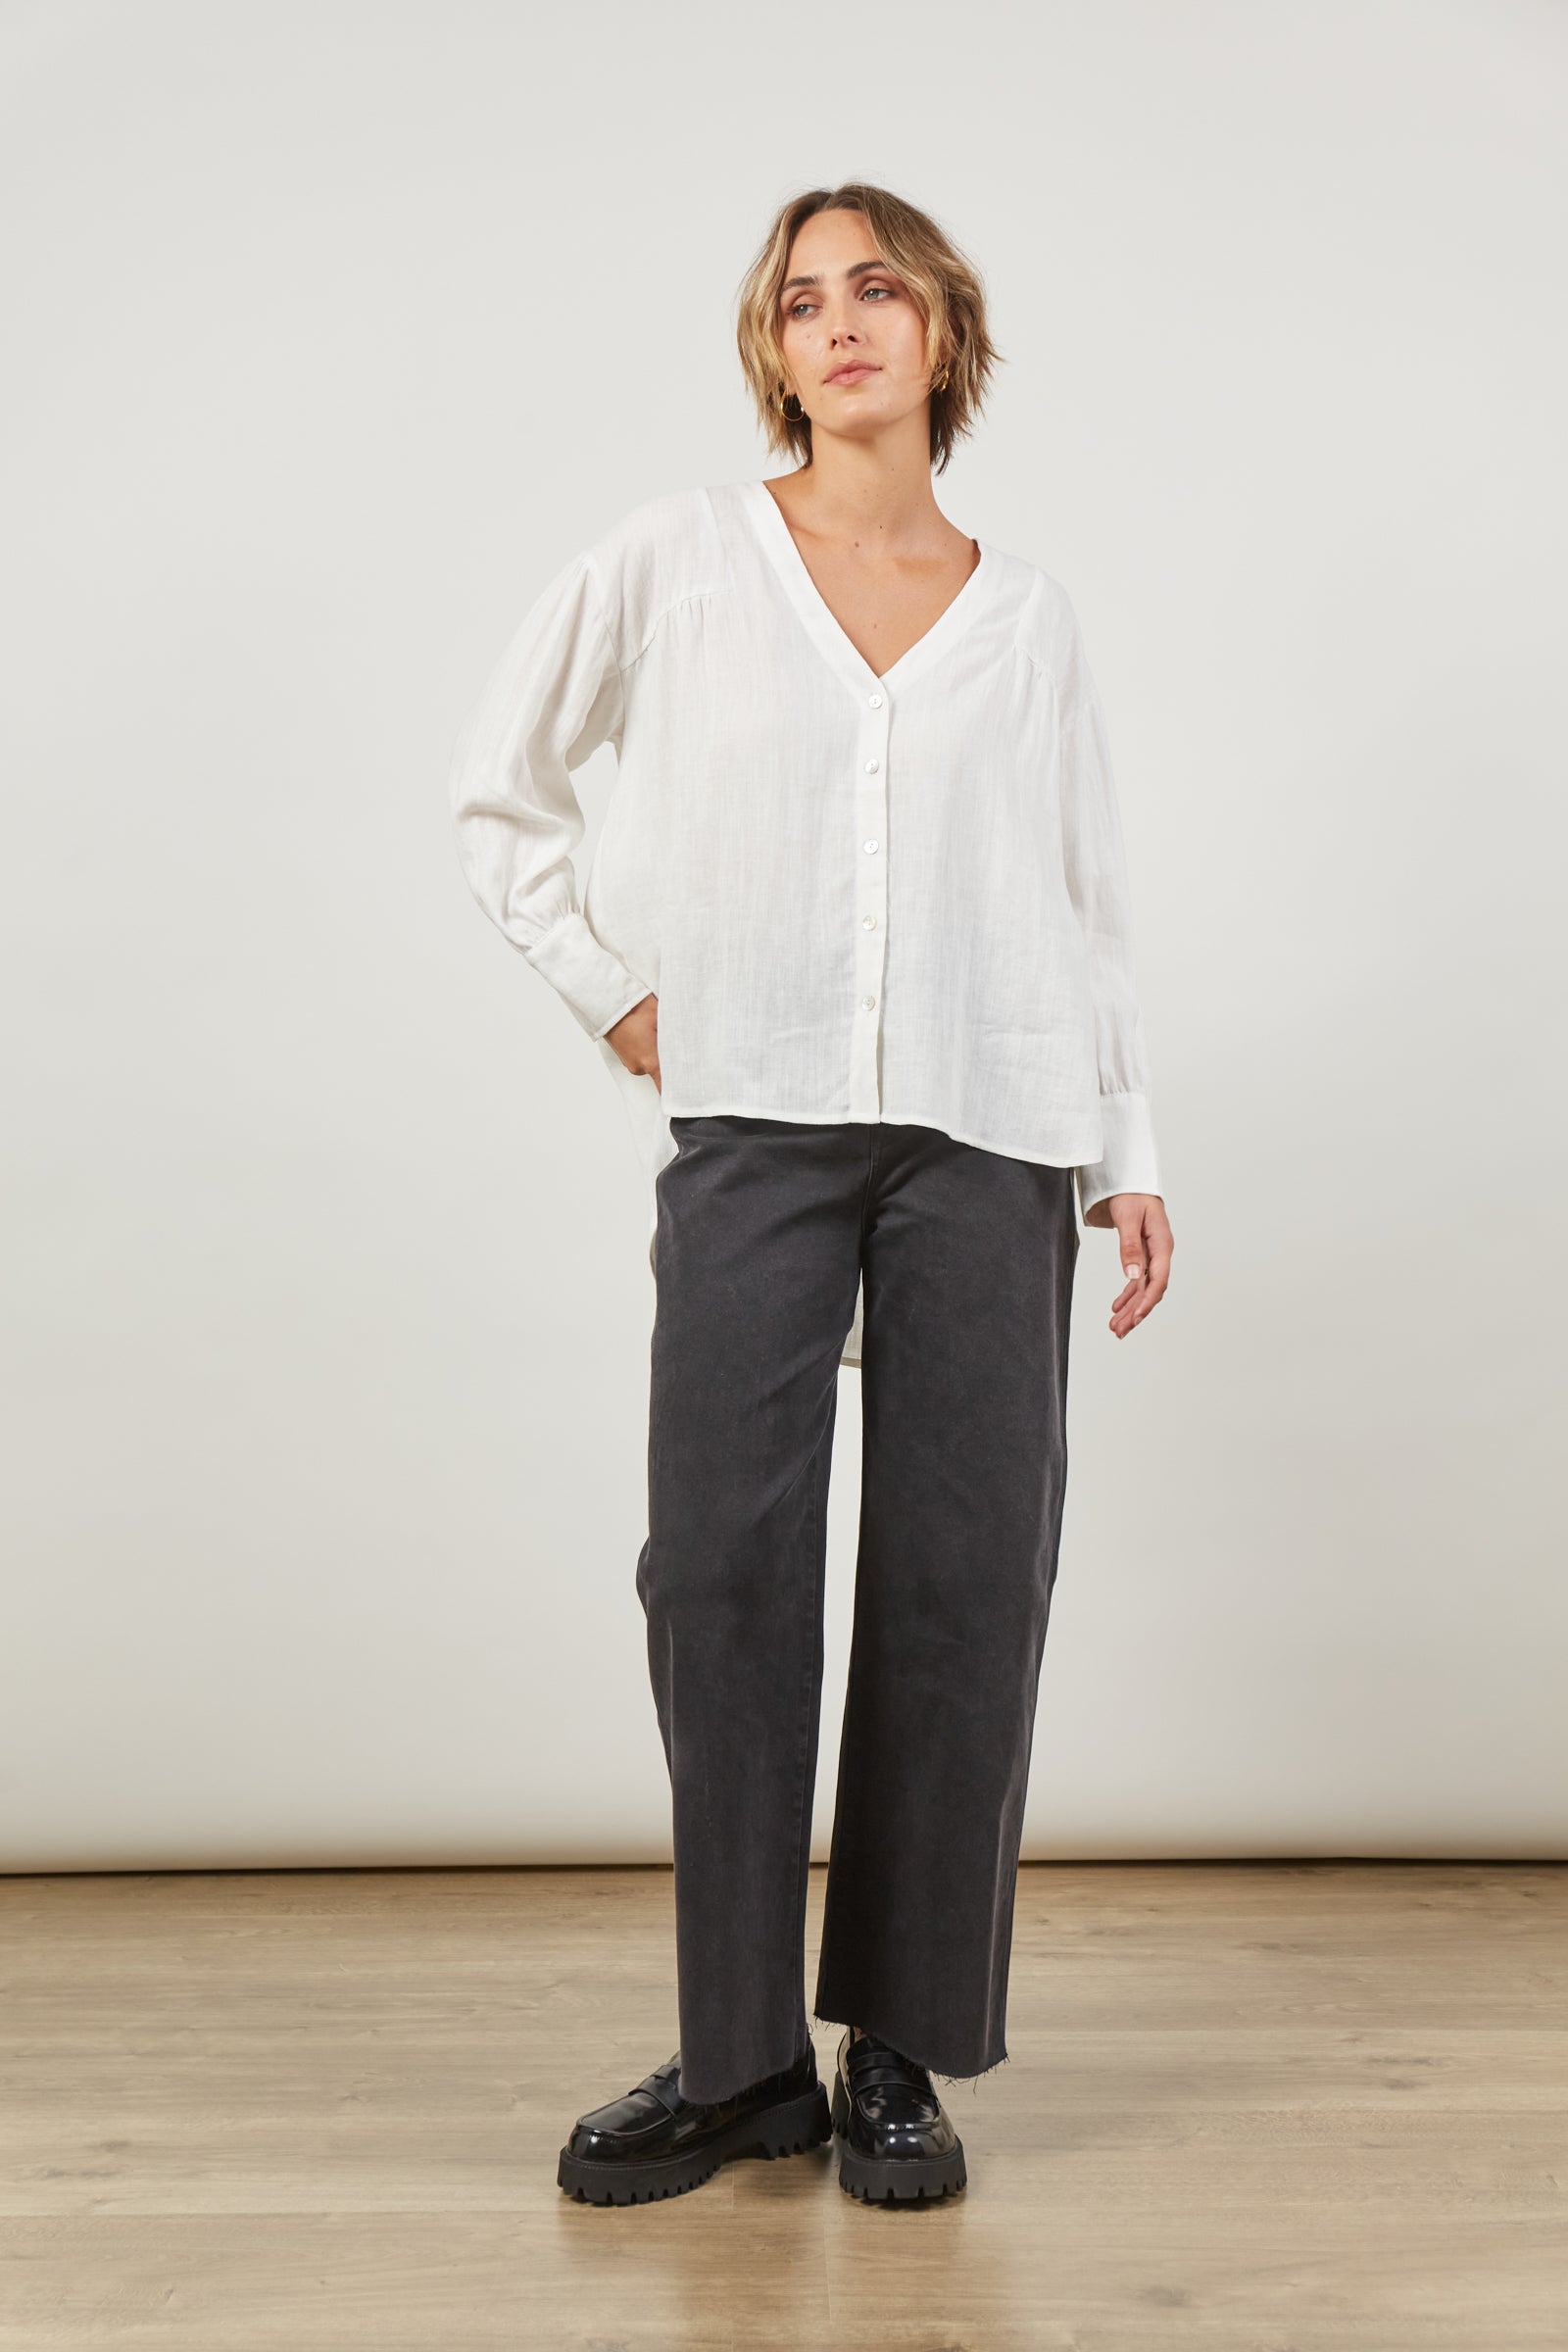 Panorama Blouse - Dove - Isle of Mine Clothing - Top L/S Linen